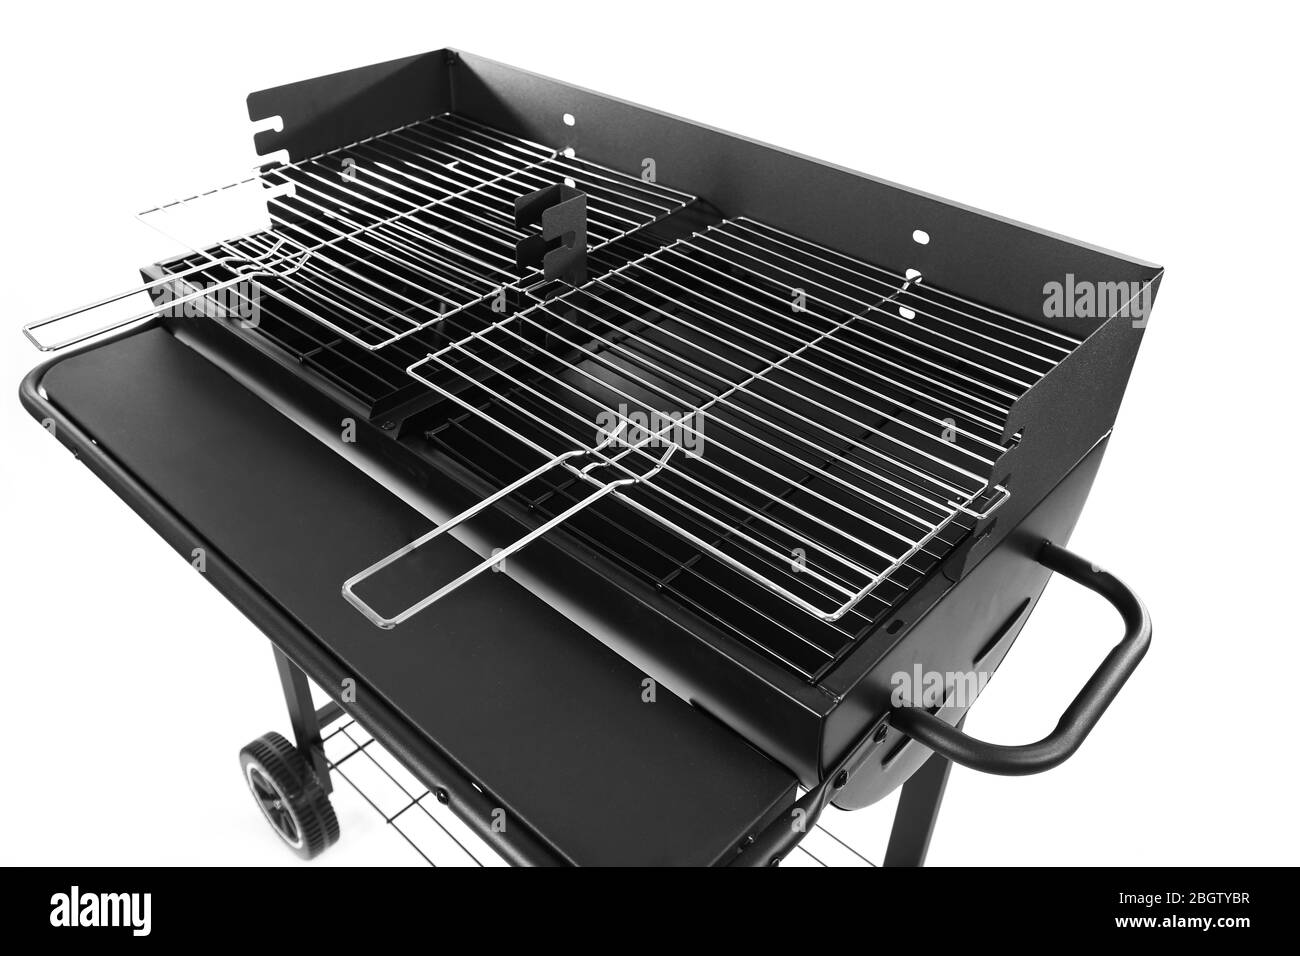 Barbecue grill isolated on white Stock Photo